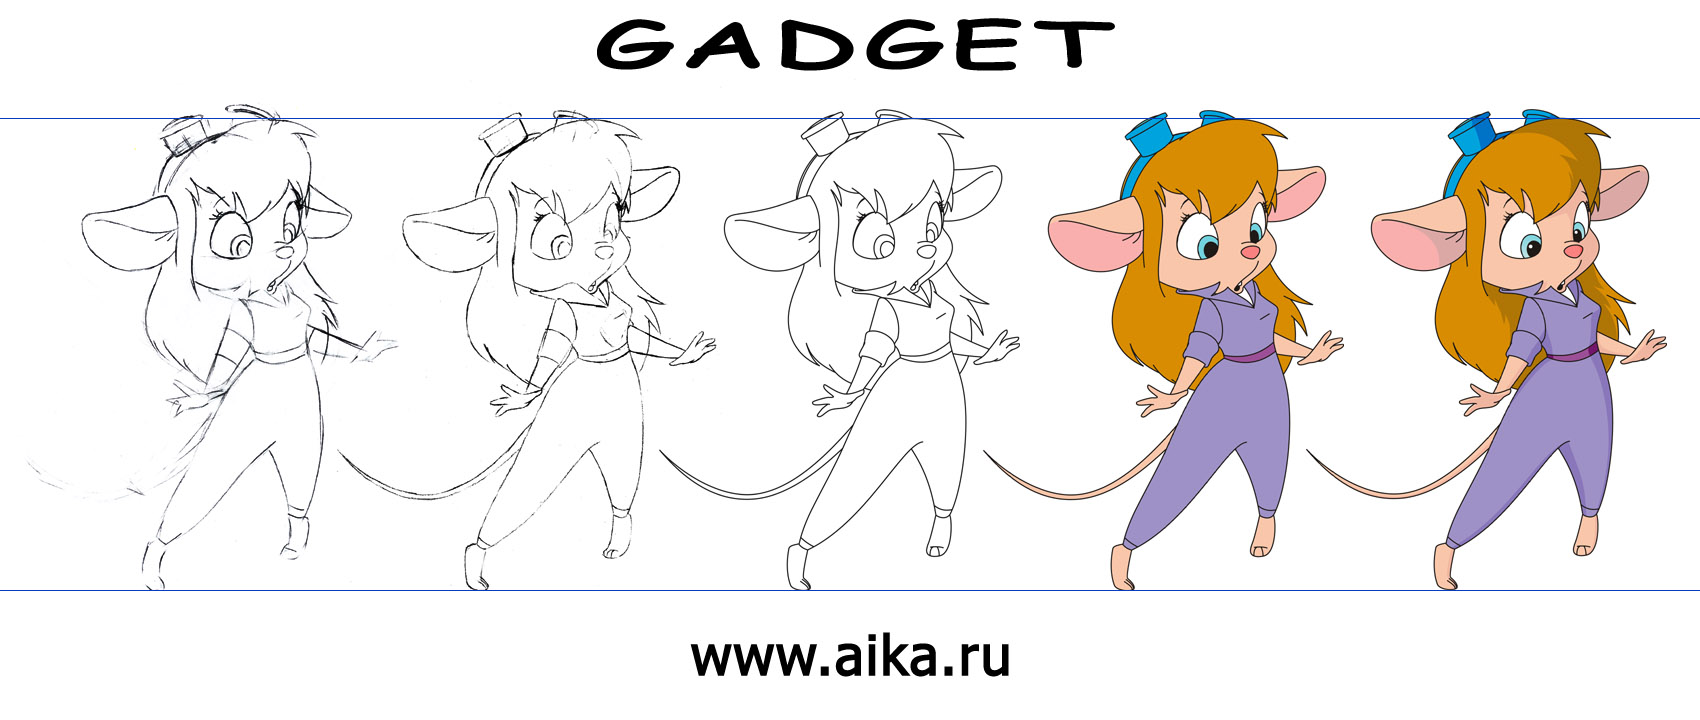 Drawing Gadget step-by-step. 